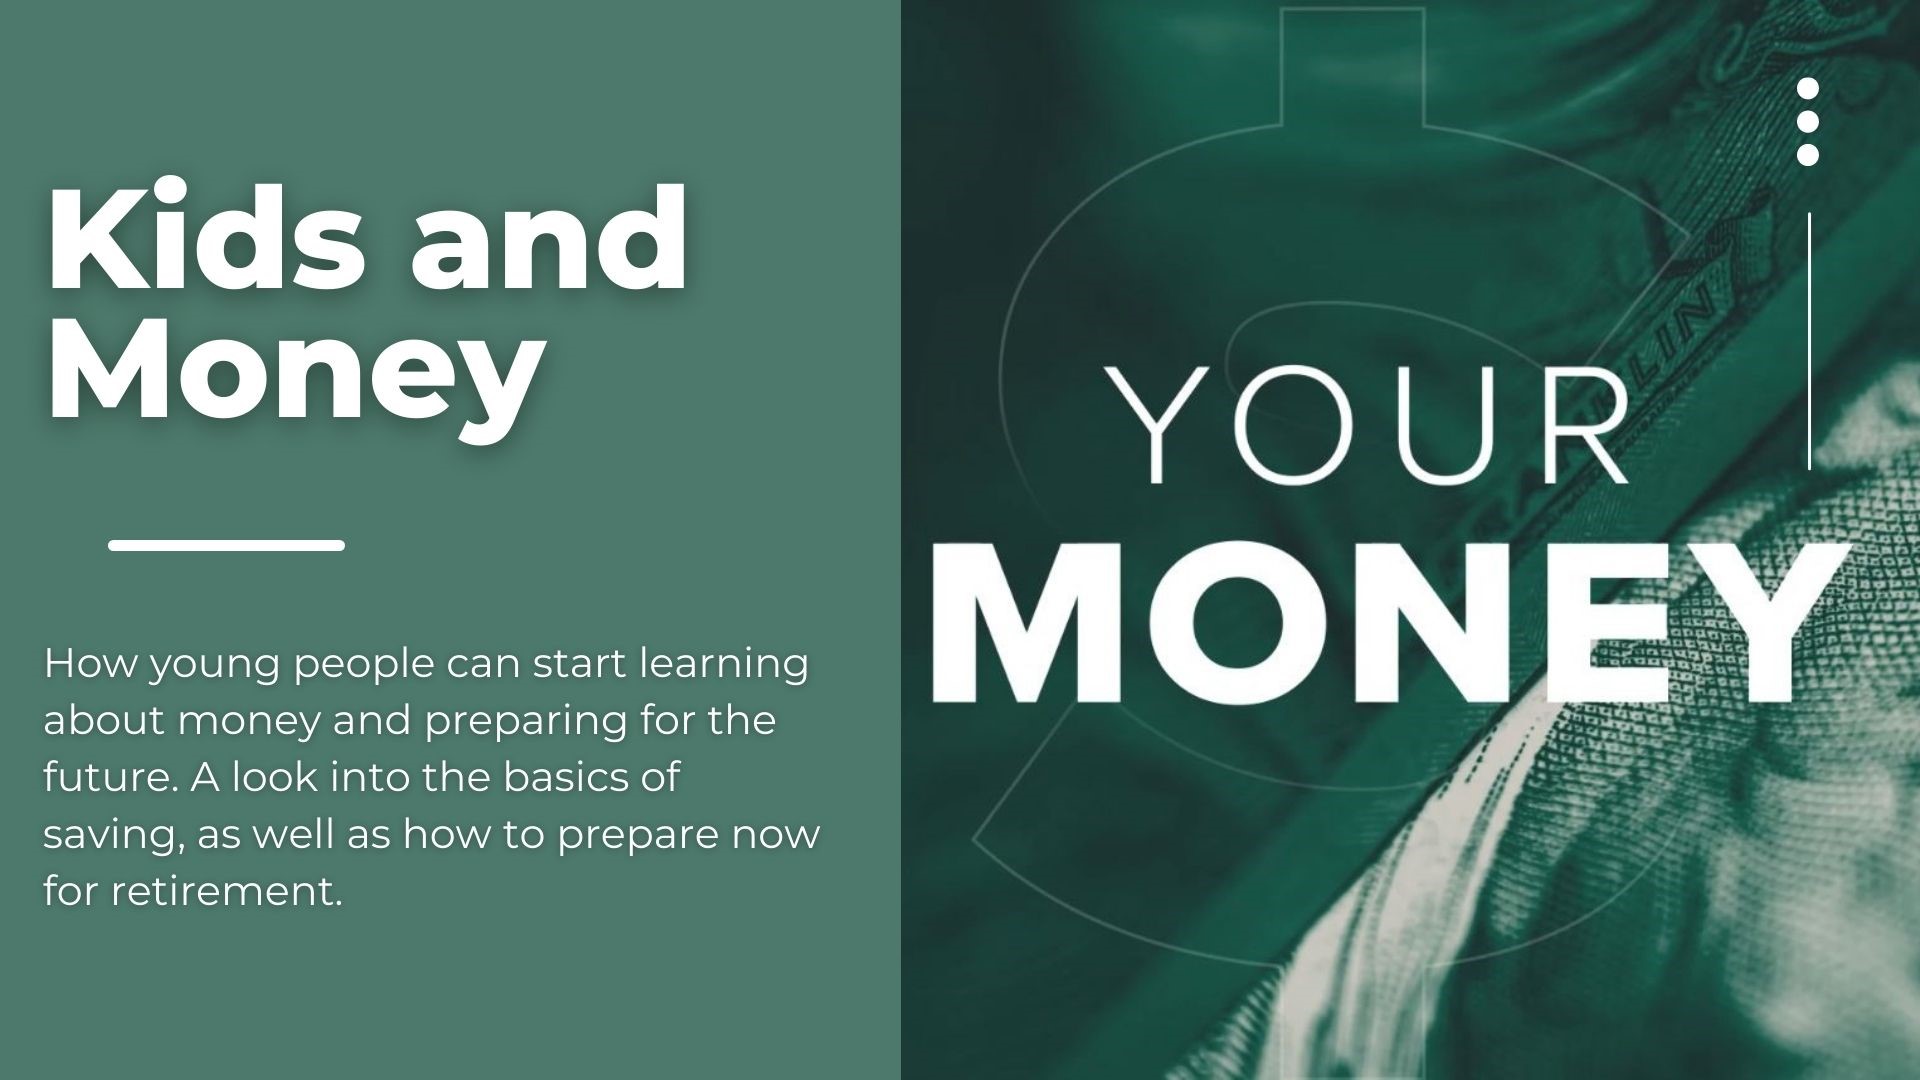 How young people can start learning about money and preparing for the future. A look into the basics of saving, as well as how to prepare now for retirement.